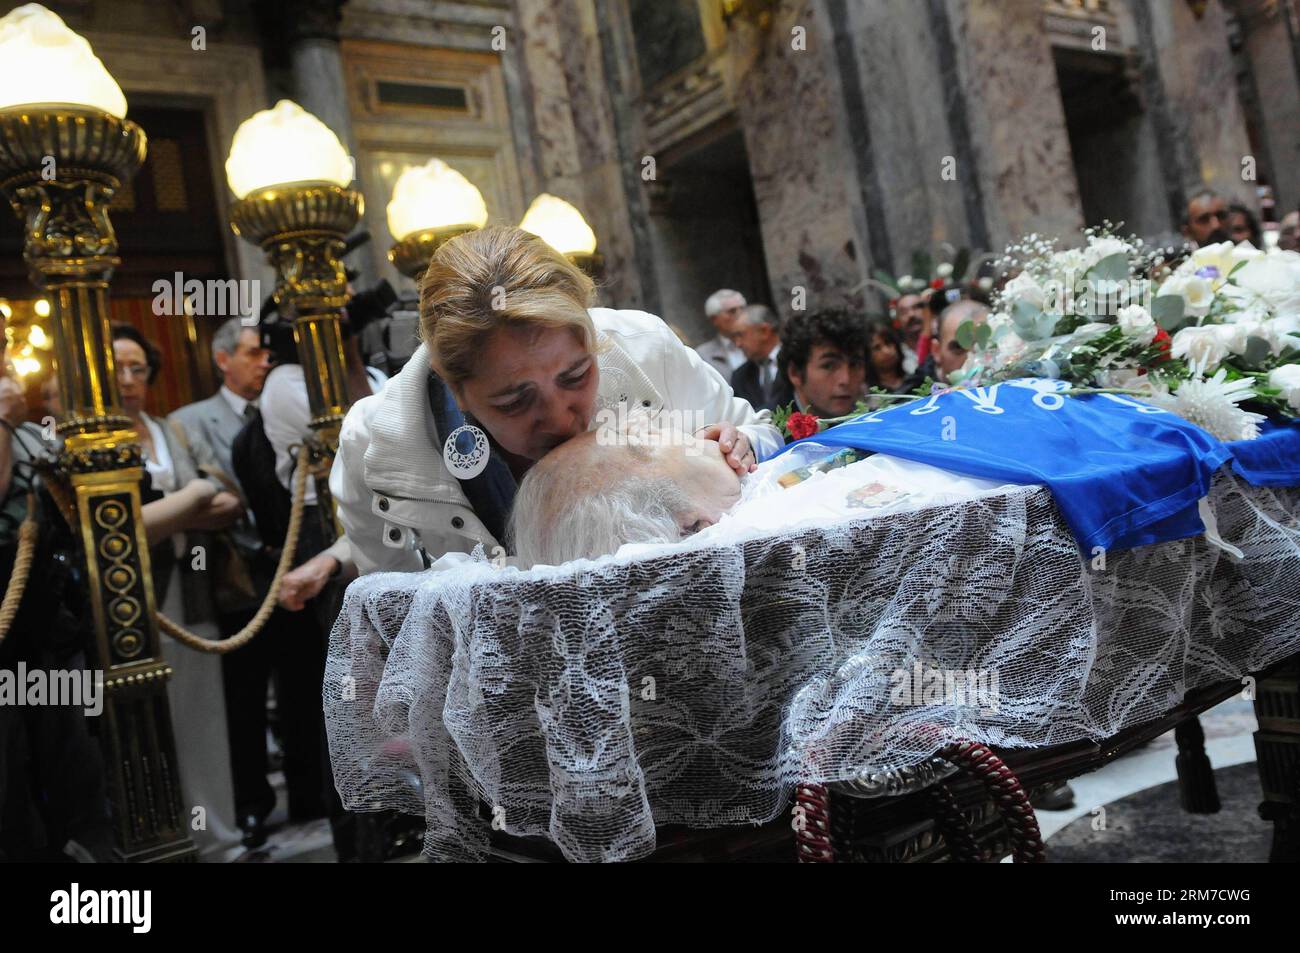 (140225) -- MONTEVIDEO, Feb. 25, 2014 (Xinhua) -- A woman kisses the forehead of Uruguayan artist Carlos Paez Vilaro, during his funeral in the Hall of Lost Steps of Legislative Palace in Montevideo, Uruguay, on Feb. 25, 2014. Carlos Paez Vilaro died of heart attack at the age of 90 on Monday morning in Casapueblo, a citadel-sculpture created by the artist himself that includes a museum, an art gallery and the Hotel Casapueblo. (Xinhua/Nicolas Celaya) (jp) (ah) URUGUAY-MONTEVIDEO-CASAPUEBLO-ART-VILARO-FUNERAL PUBLICATIONxNOTxINxCHN   Montevideo Feb 25 2014 XINHUA a Woman Kisses The forehead of Stock Photo